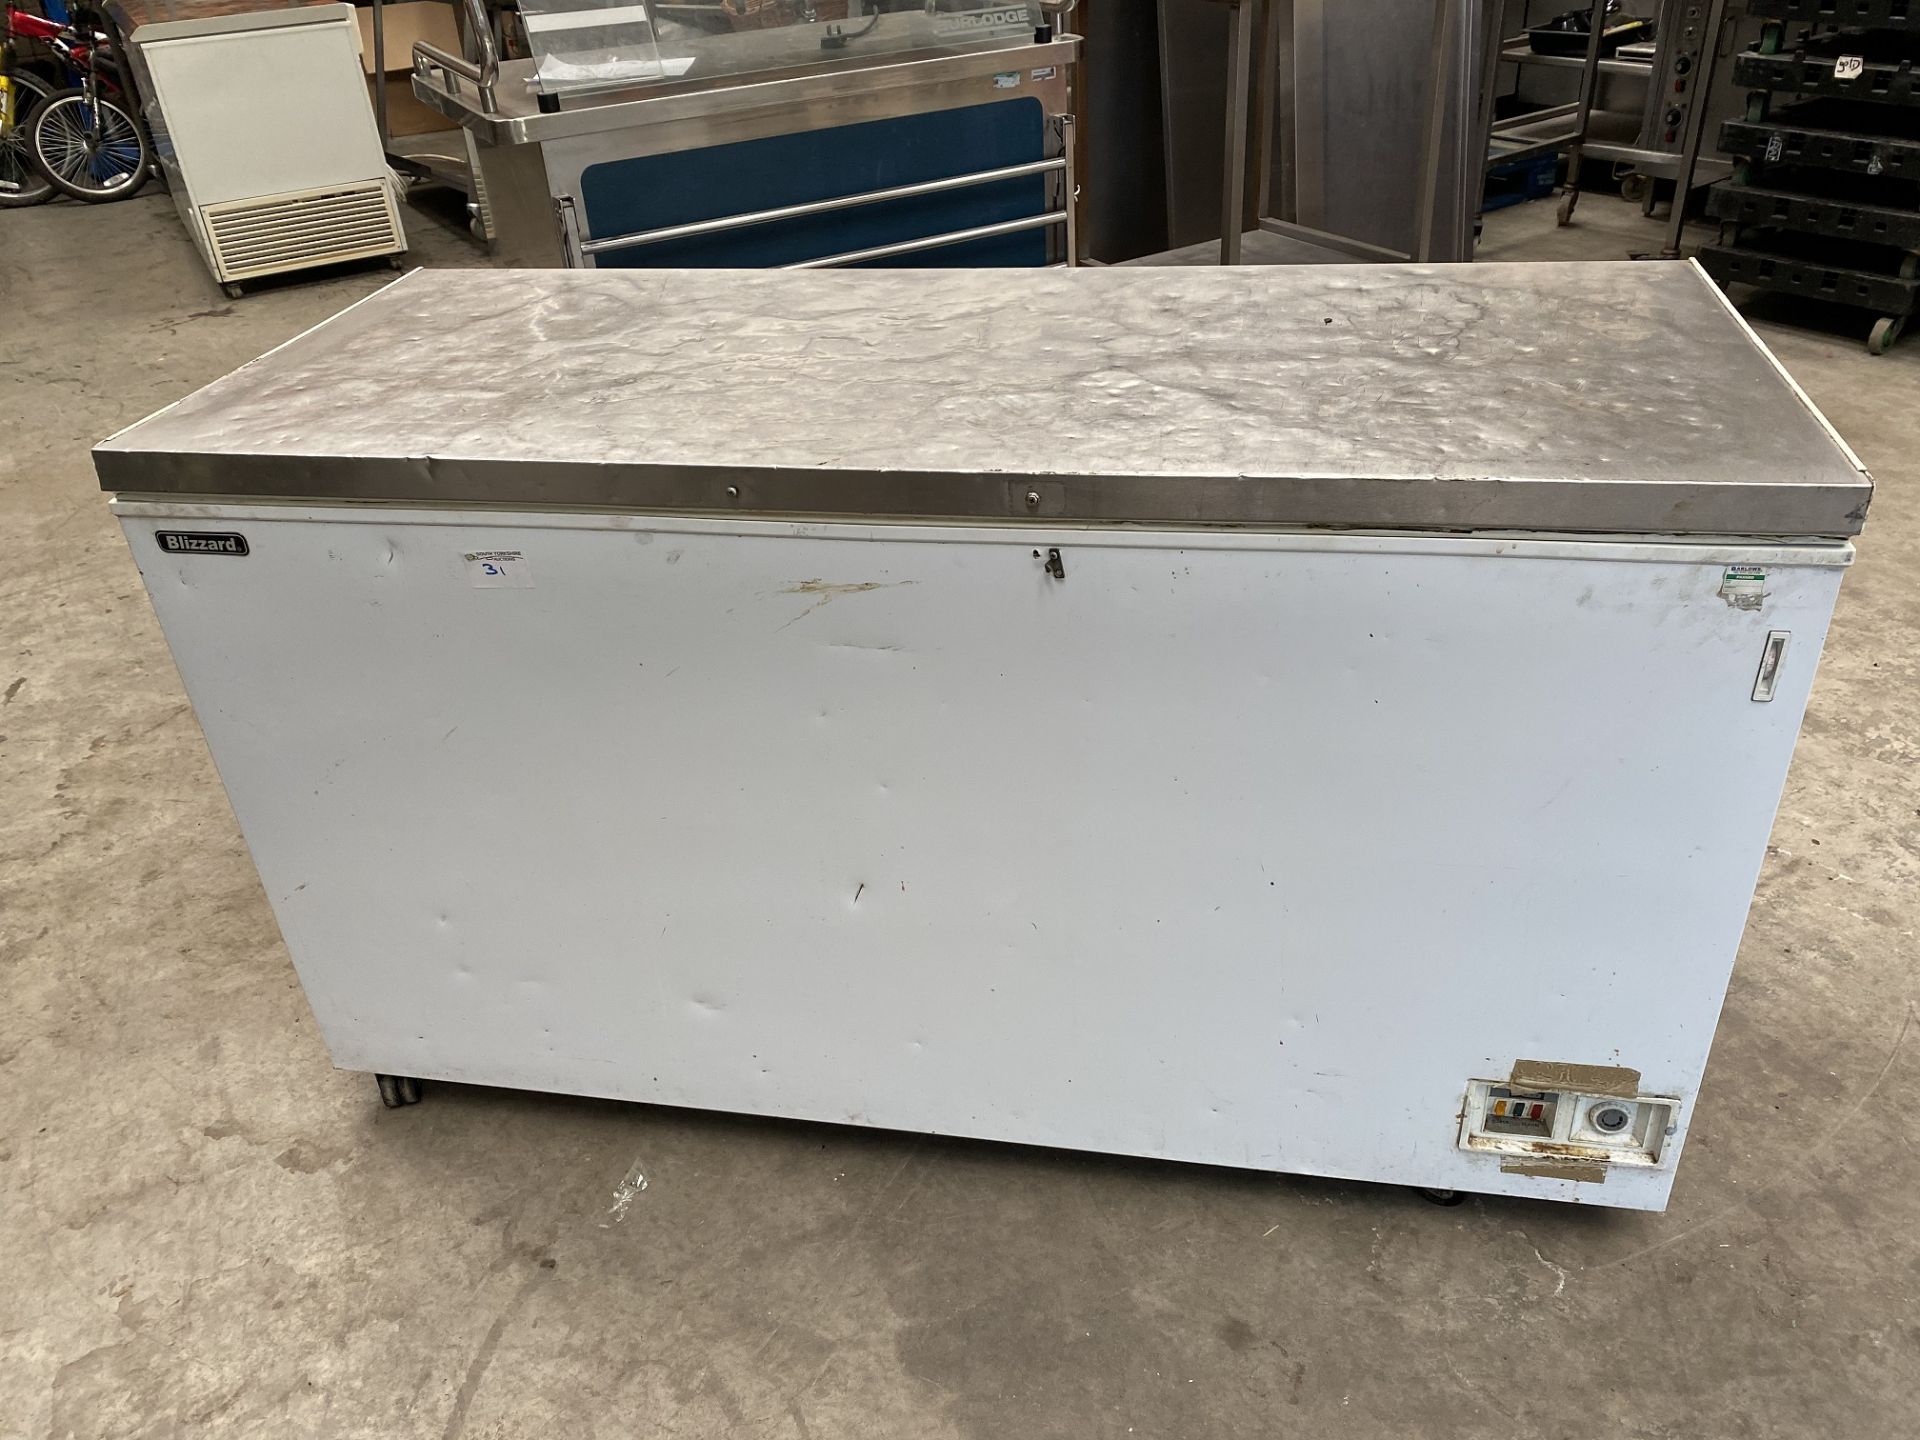 Blizzard Chest Freezer with Stainless Top